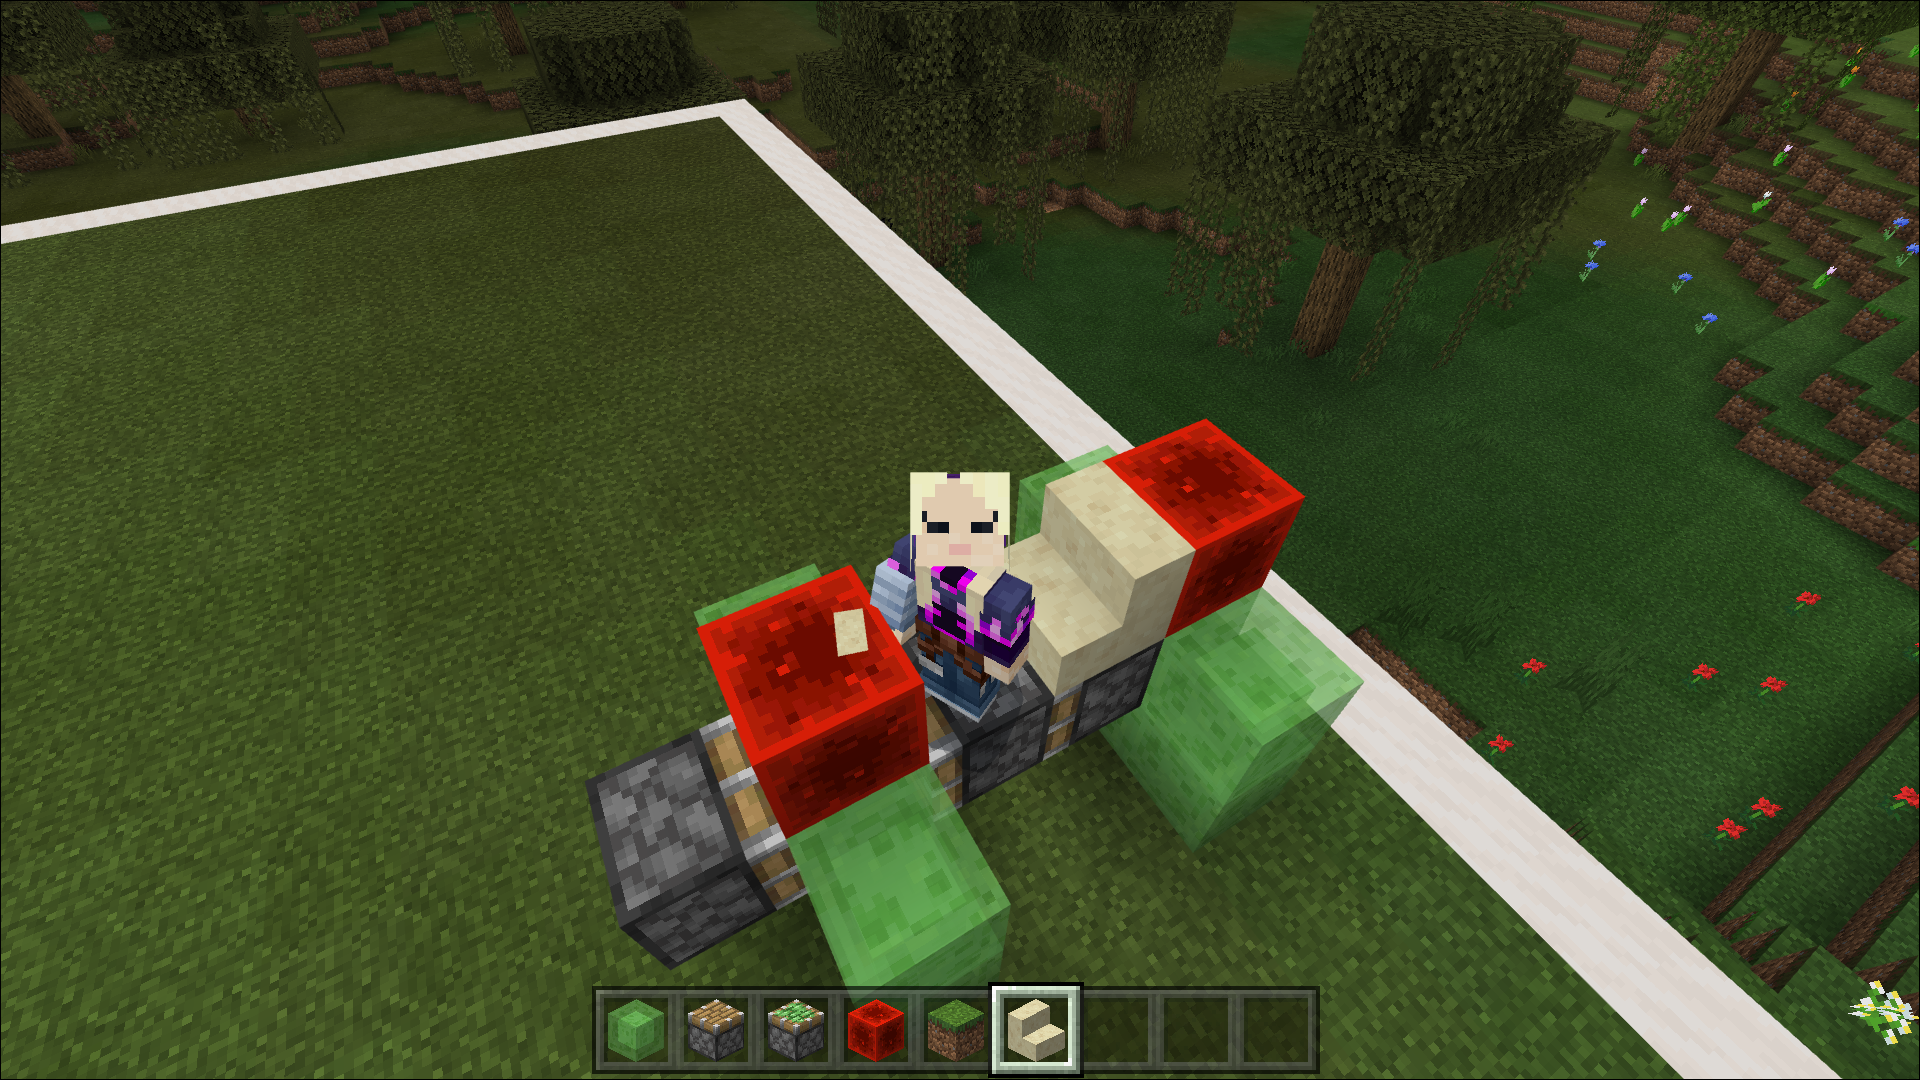 How to Make a Car in Minecraft